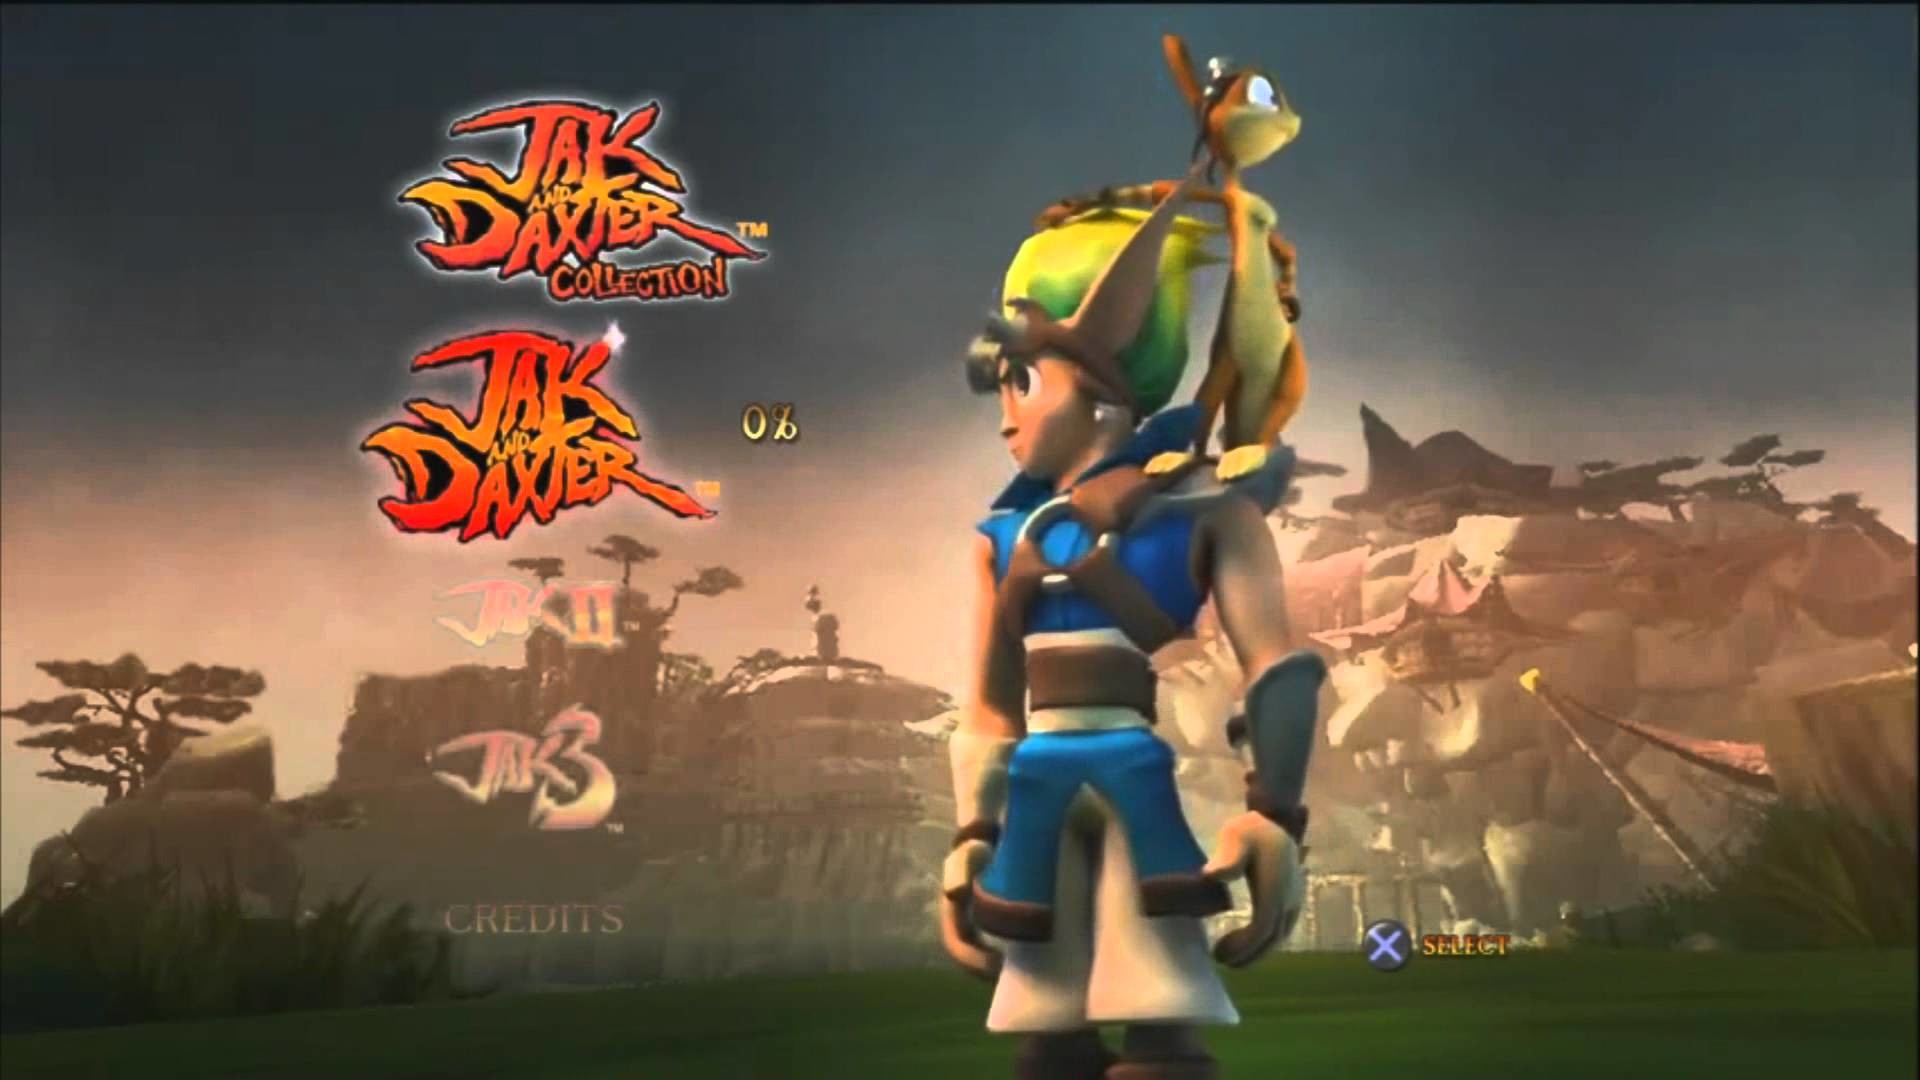 Jak And Daxter wallpaper by Sturge0n  Download on ZEDGE  2db8